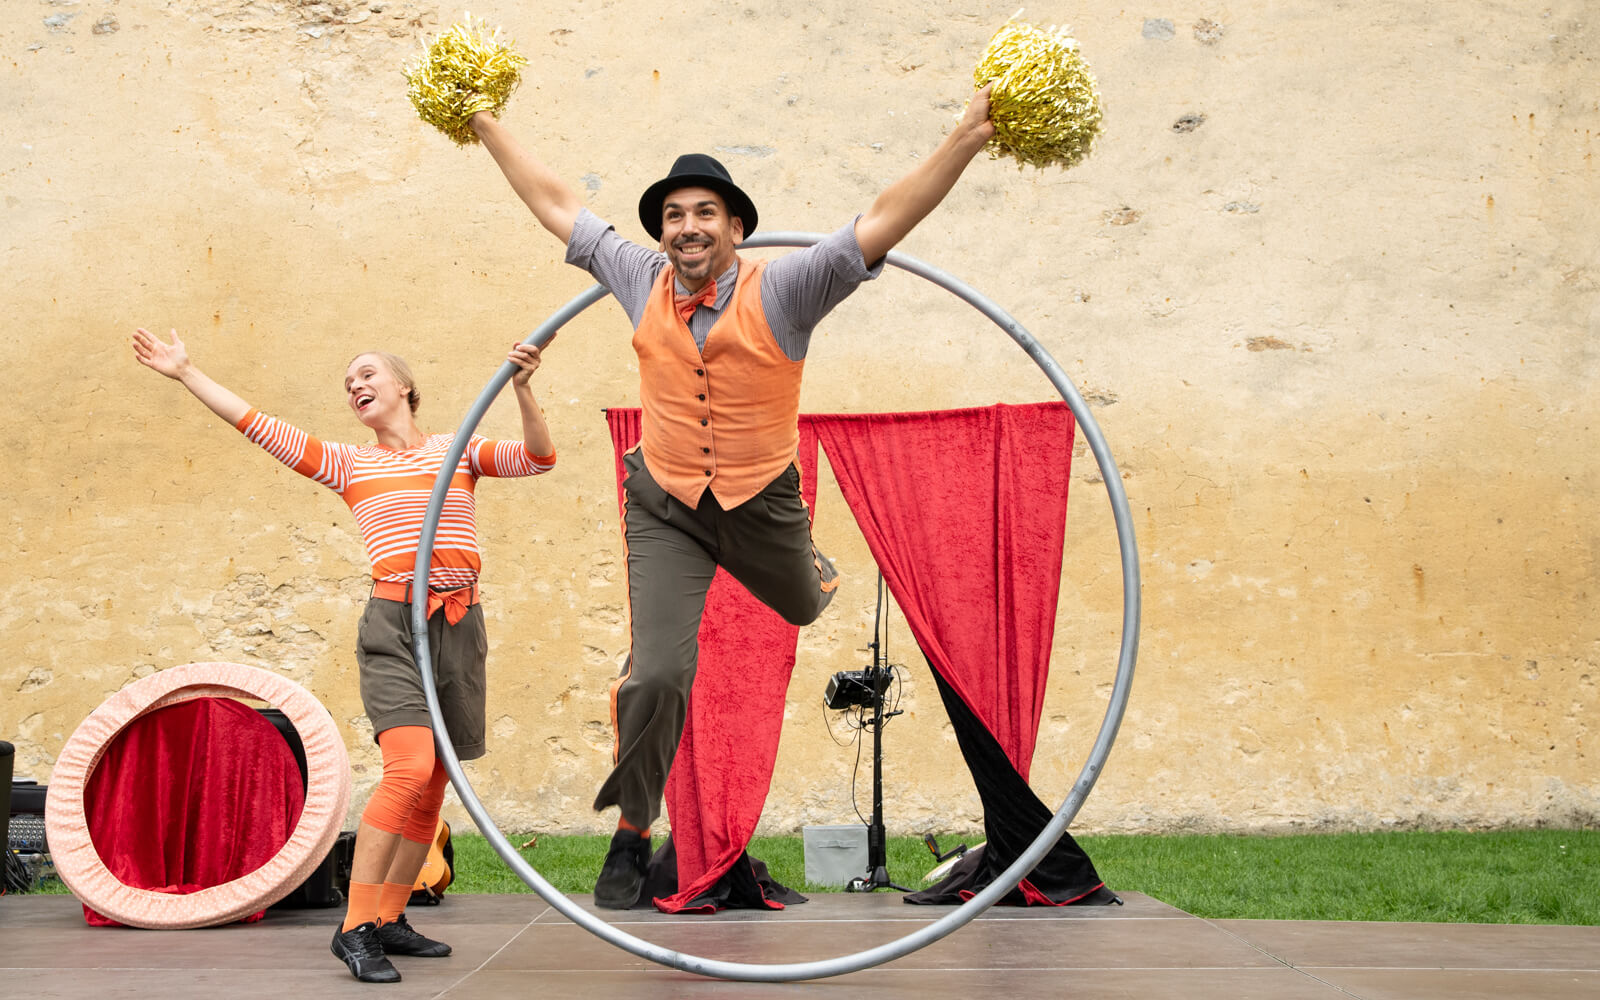 Circus artists: woman raising arms, man in a Cyr wheel with golden pompoms.